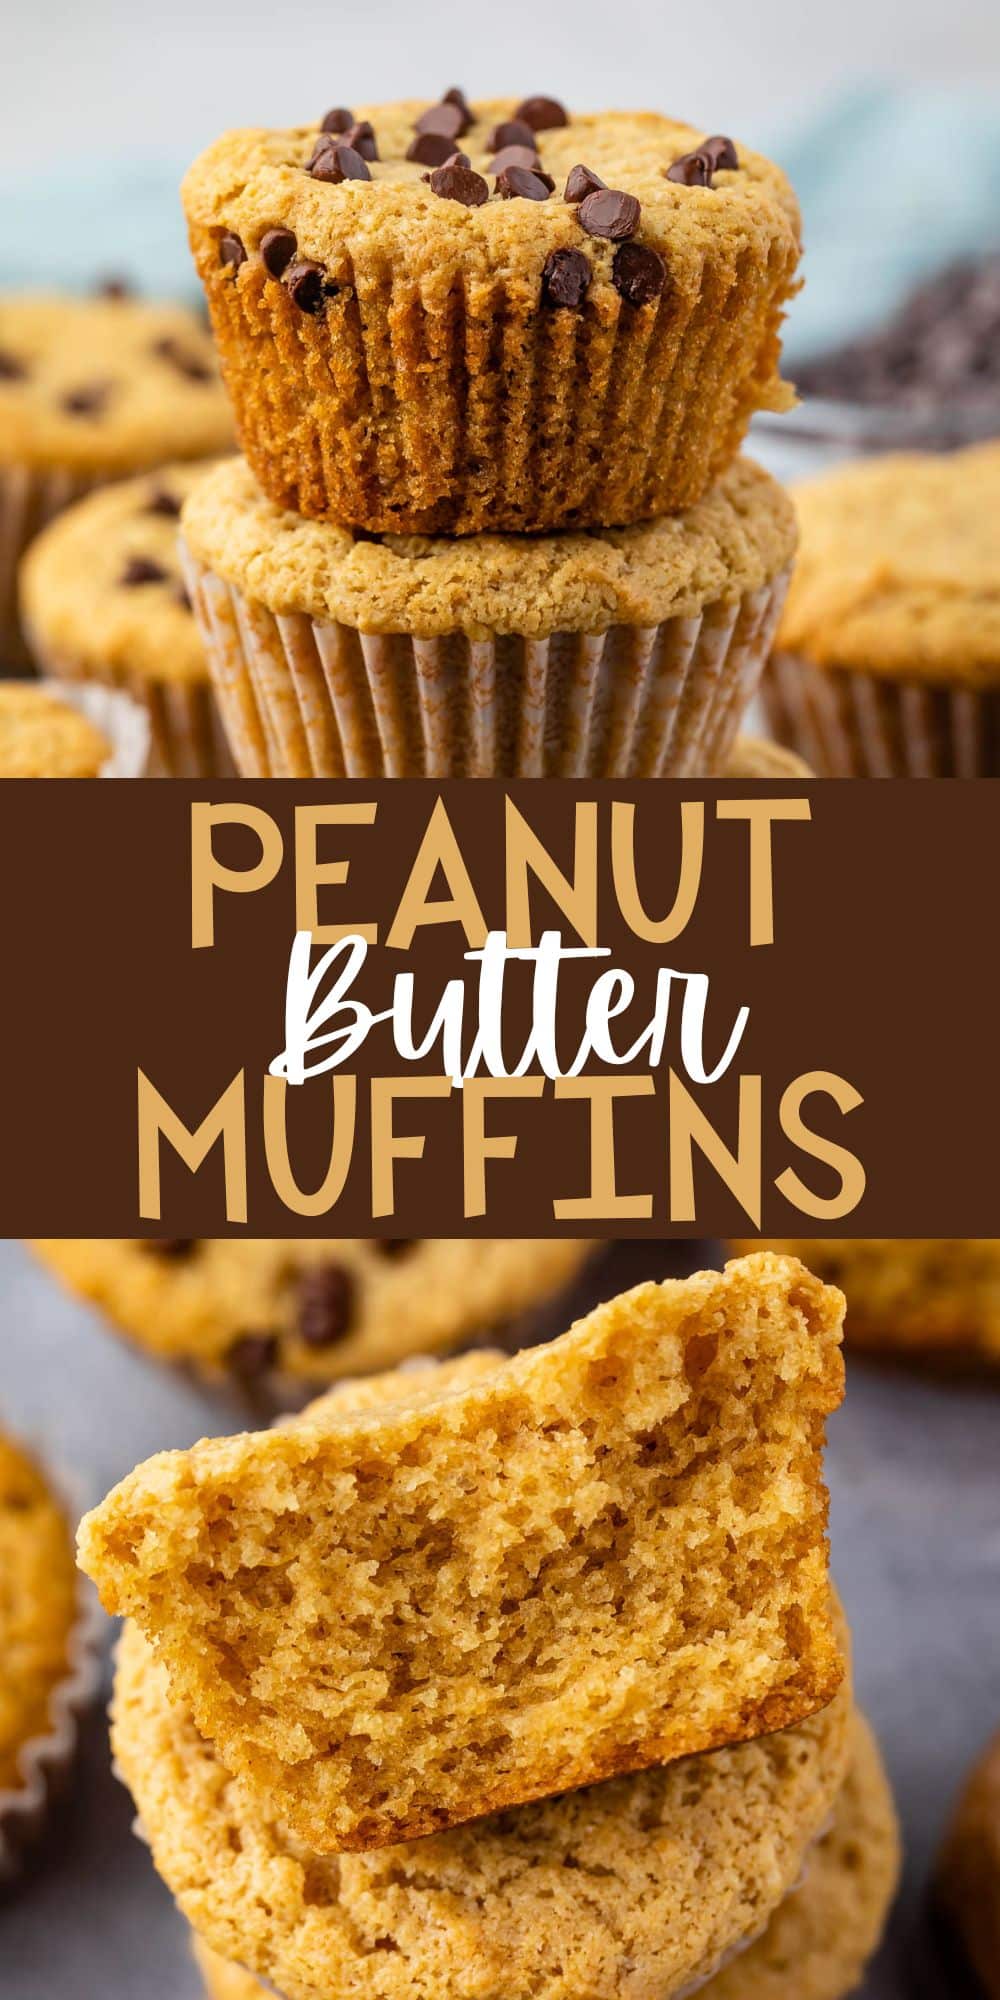 two photos of stacked muffins with chocolate chips sprinkled on top with words on the image.